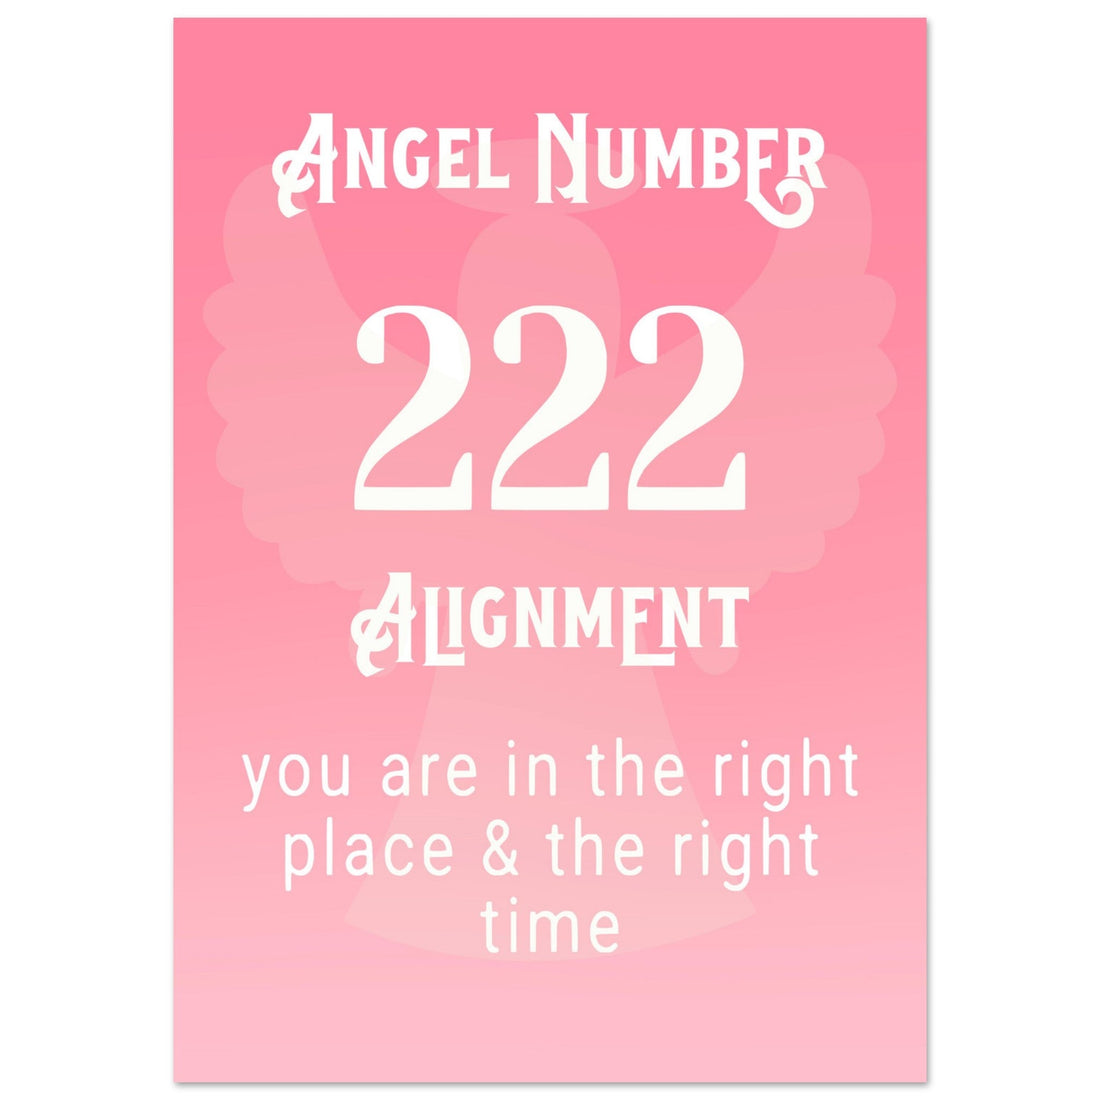 Angel Number 222 Art Print, Angel No. 222, Angel Number, Pink, #illieeart